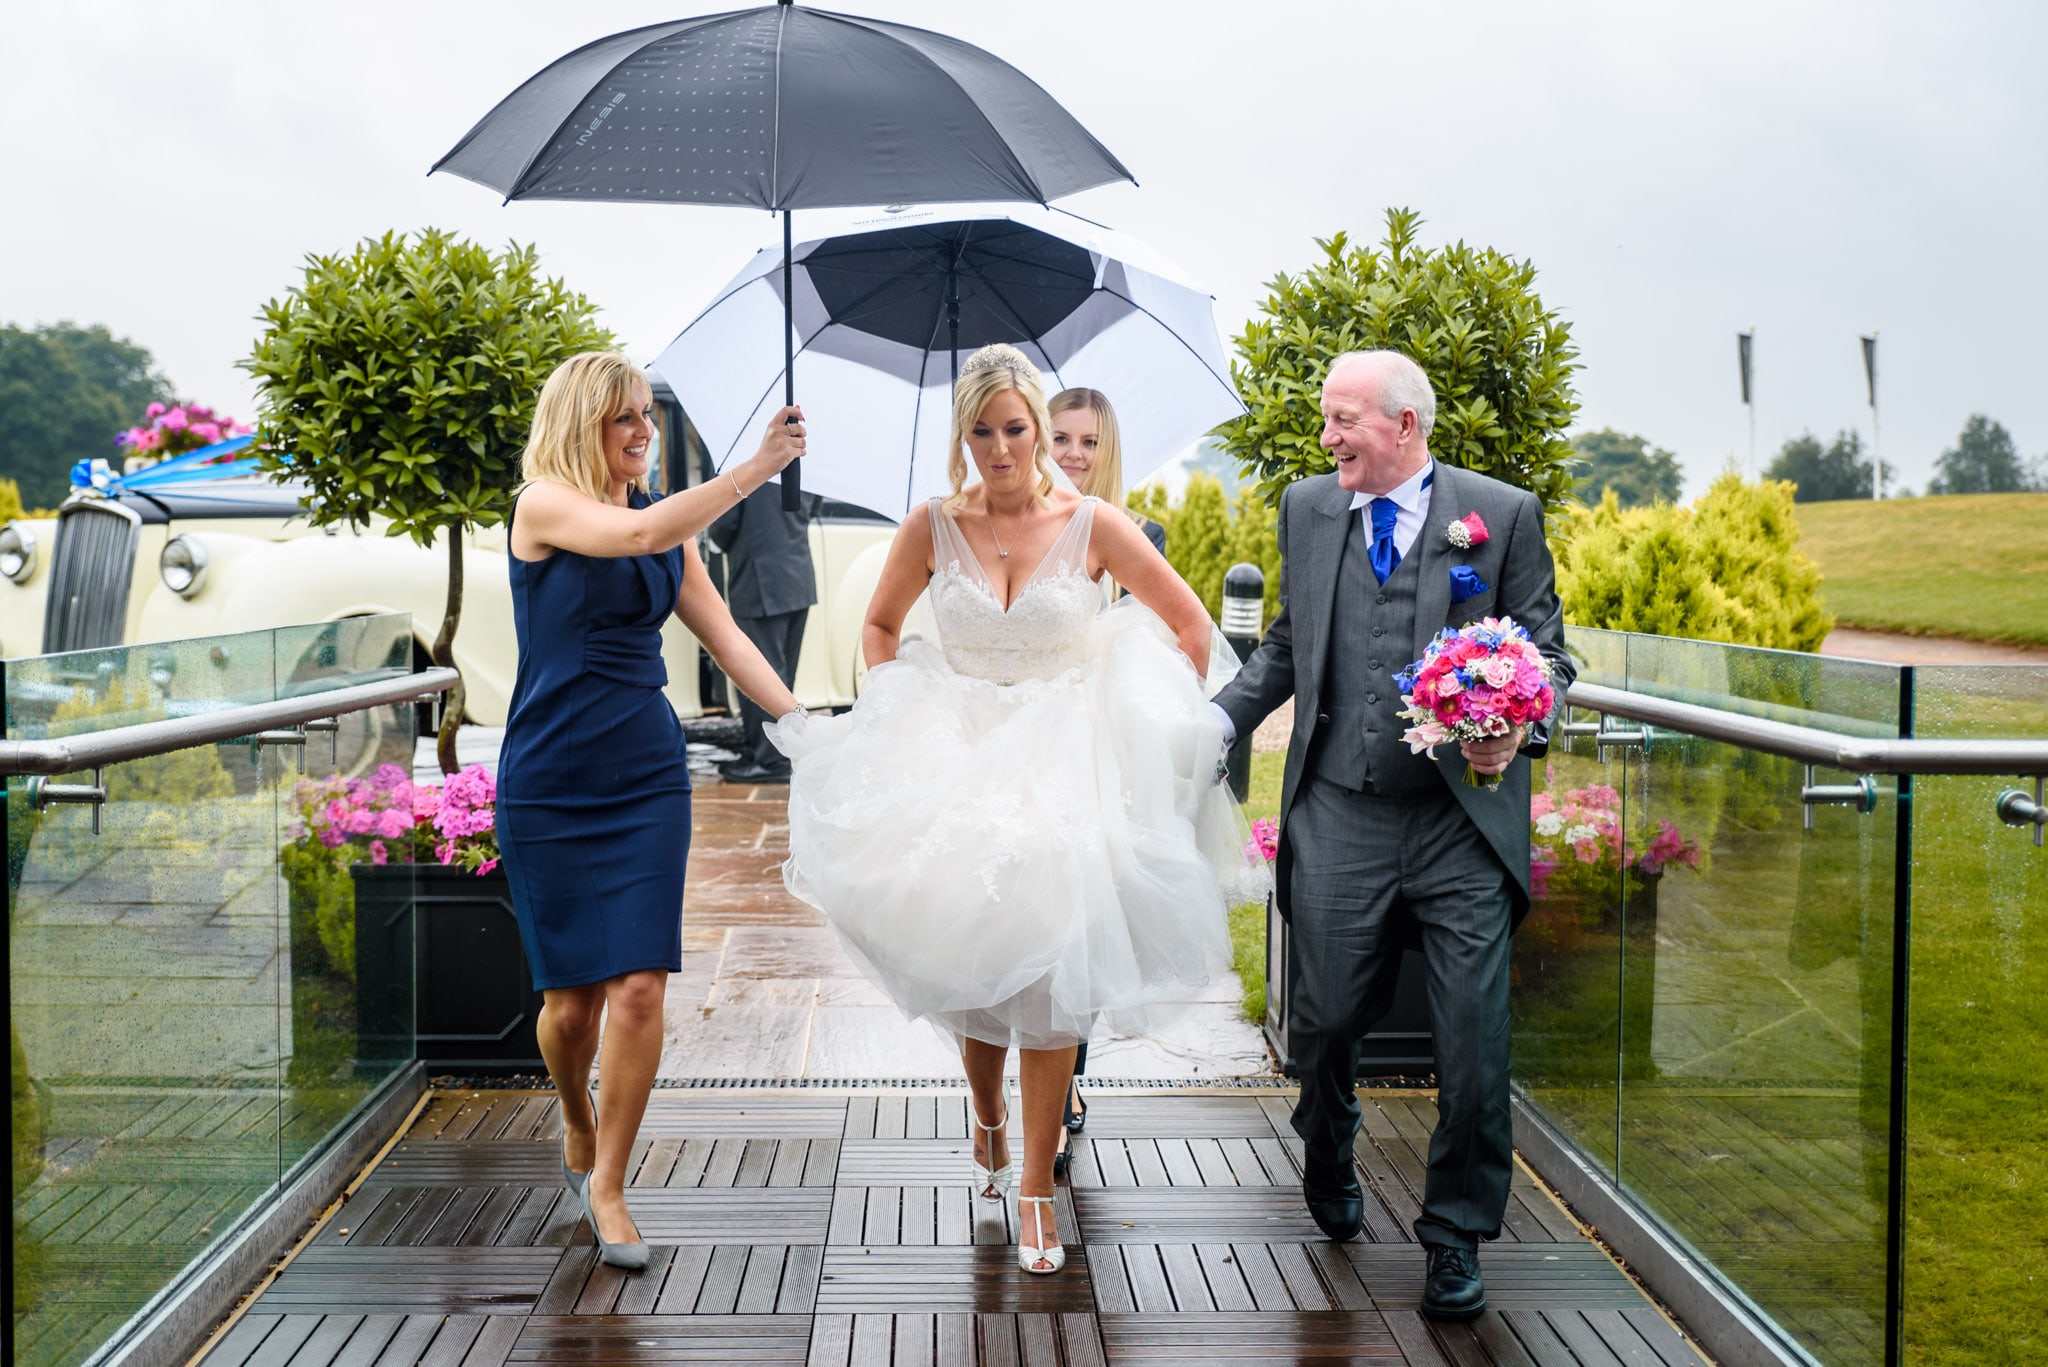 Bride walks into the ceremony in the rain with planner holding umbrella over her